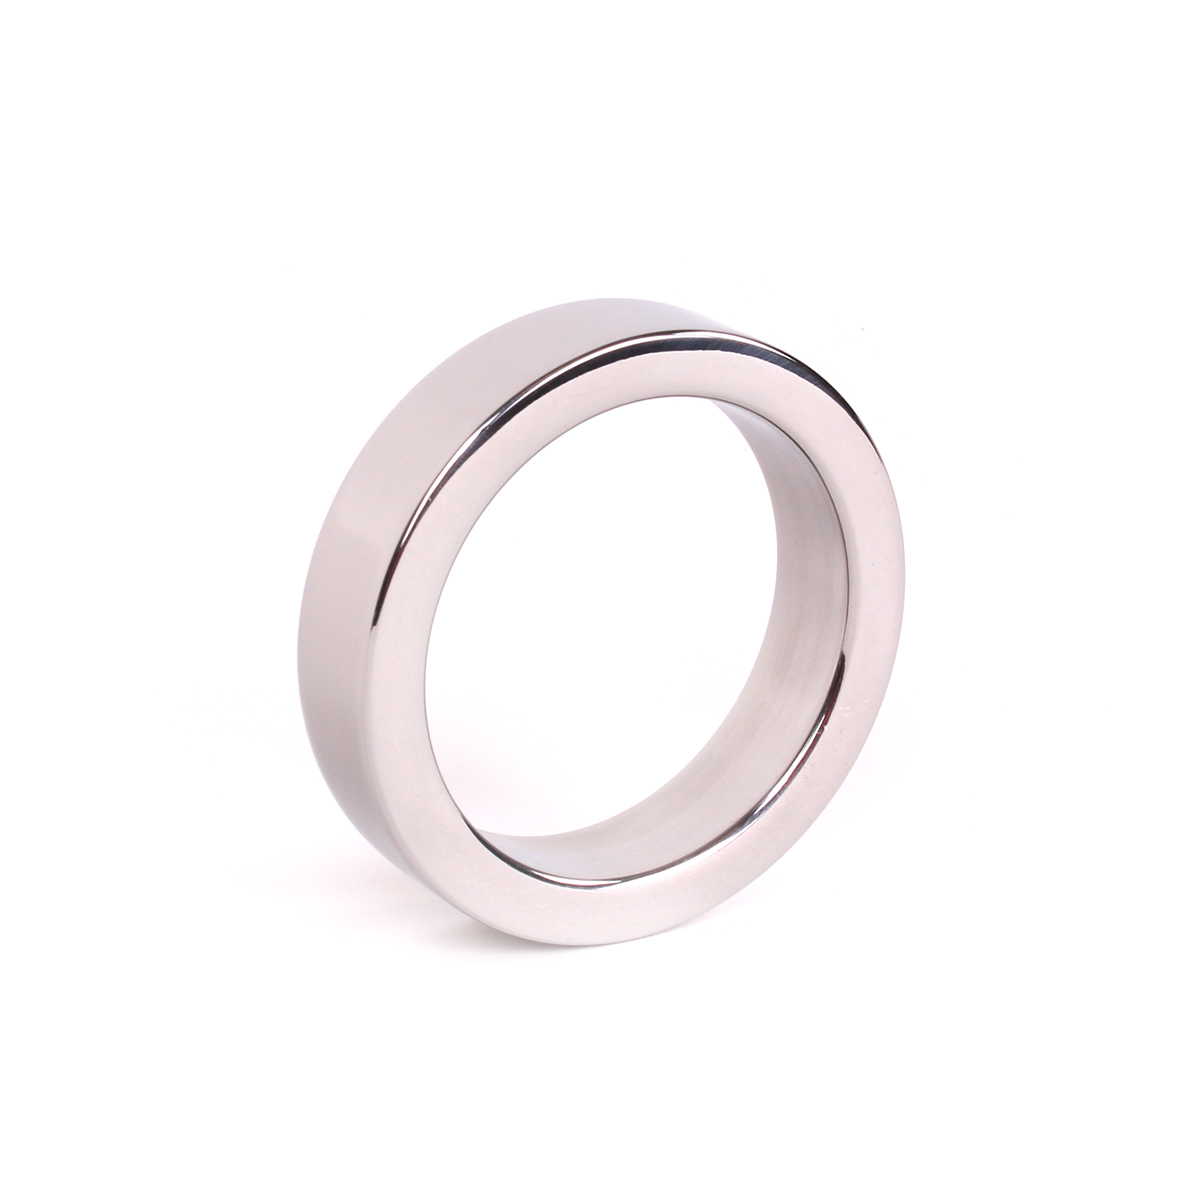 Cockring 15 mm – 50 mm